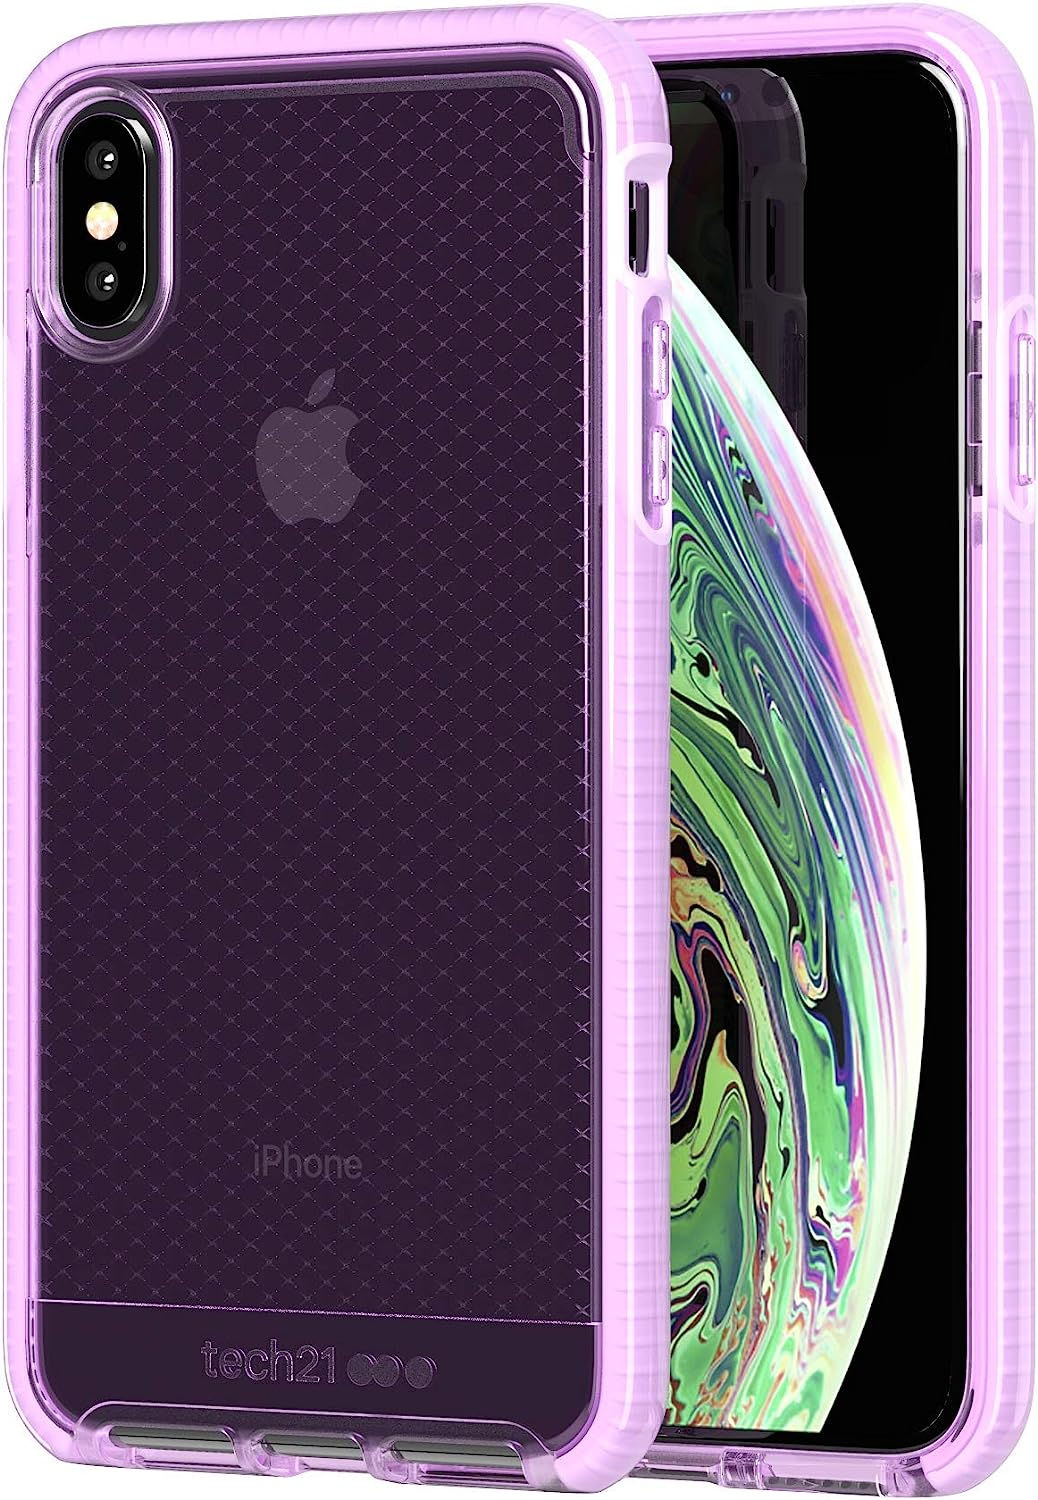 Tech21 Evo Check Apple iPhone Xs Max Case, 12ft Drop Protection - Orchid